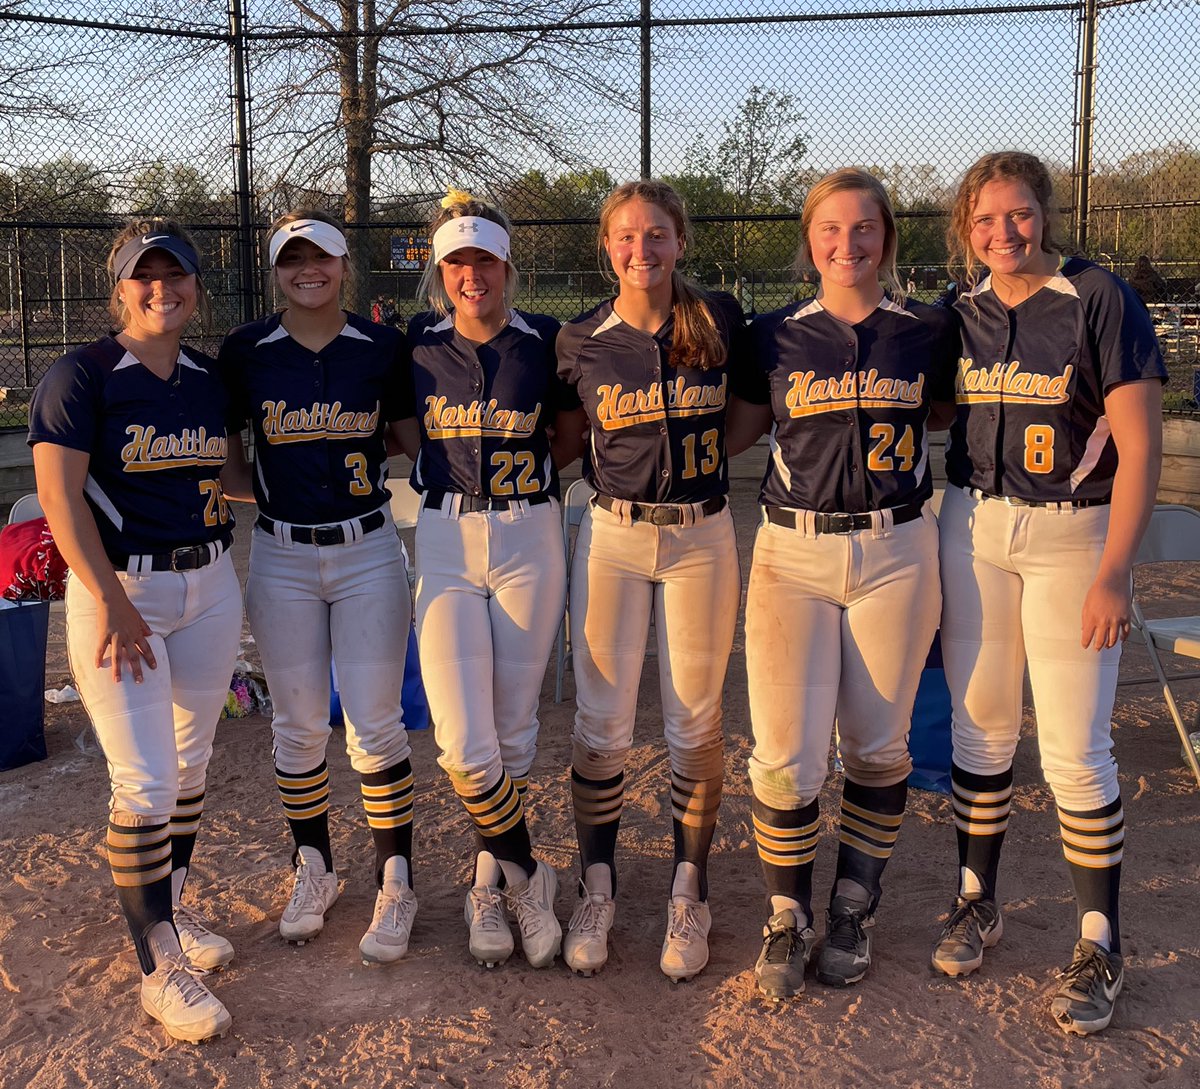 Tonight we were able honor our 6 amazing seniors! This team is the true embodiment of #FAMILY and that can only be done with the servant leadership of these 6 incredible young women. You make Hartland Softball proud!